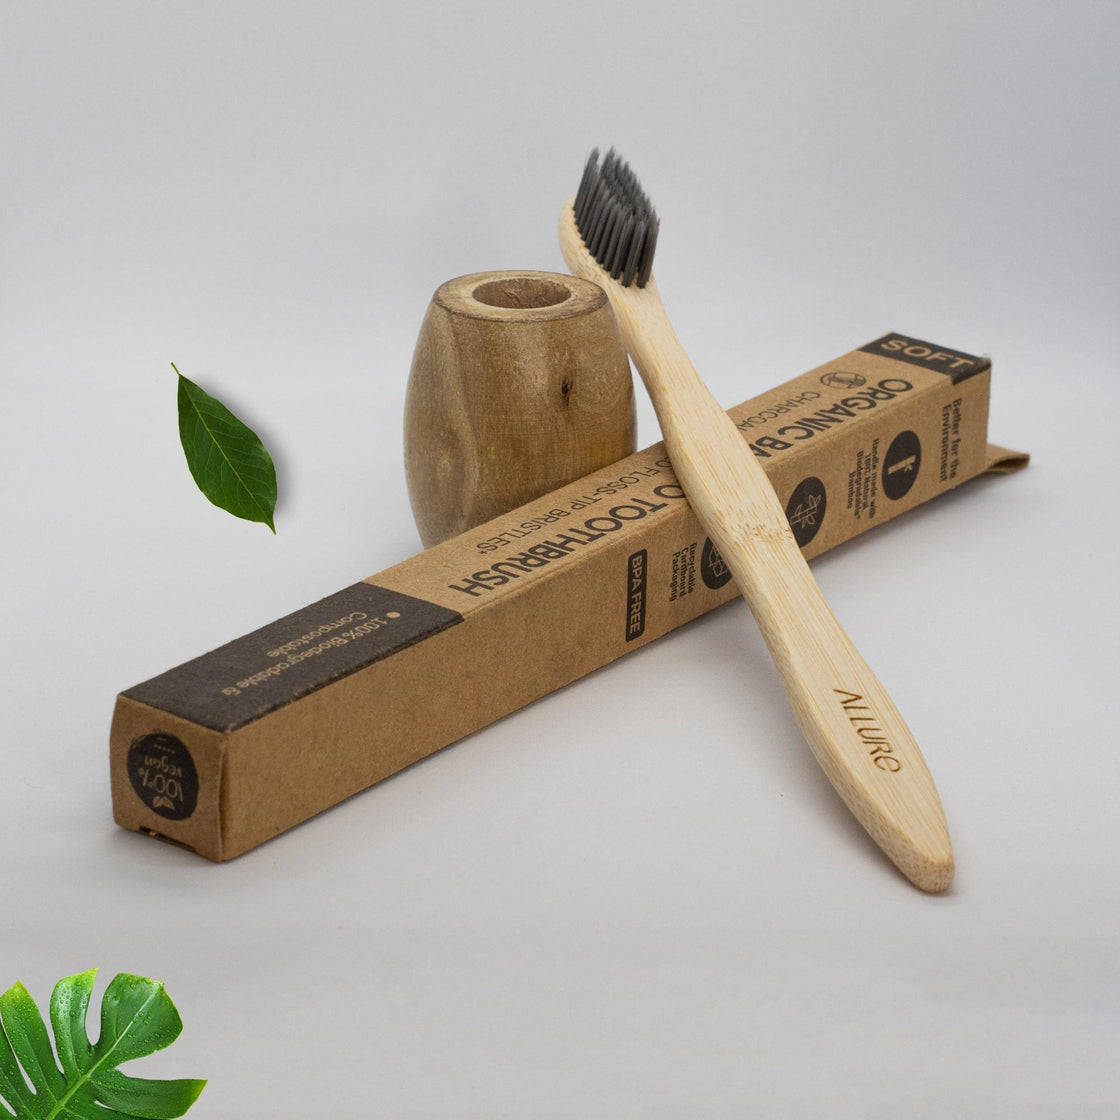 Allure Bamboo Toothbrush with Wooden Toothbrush stand (OT-01 + OTS)